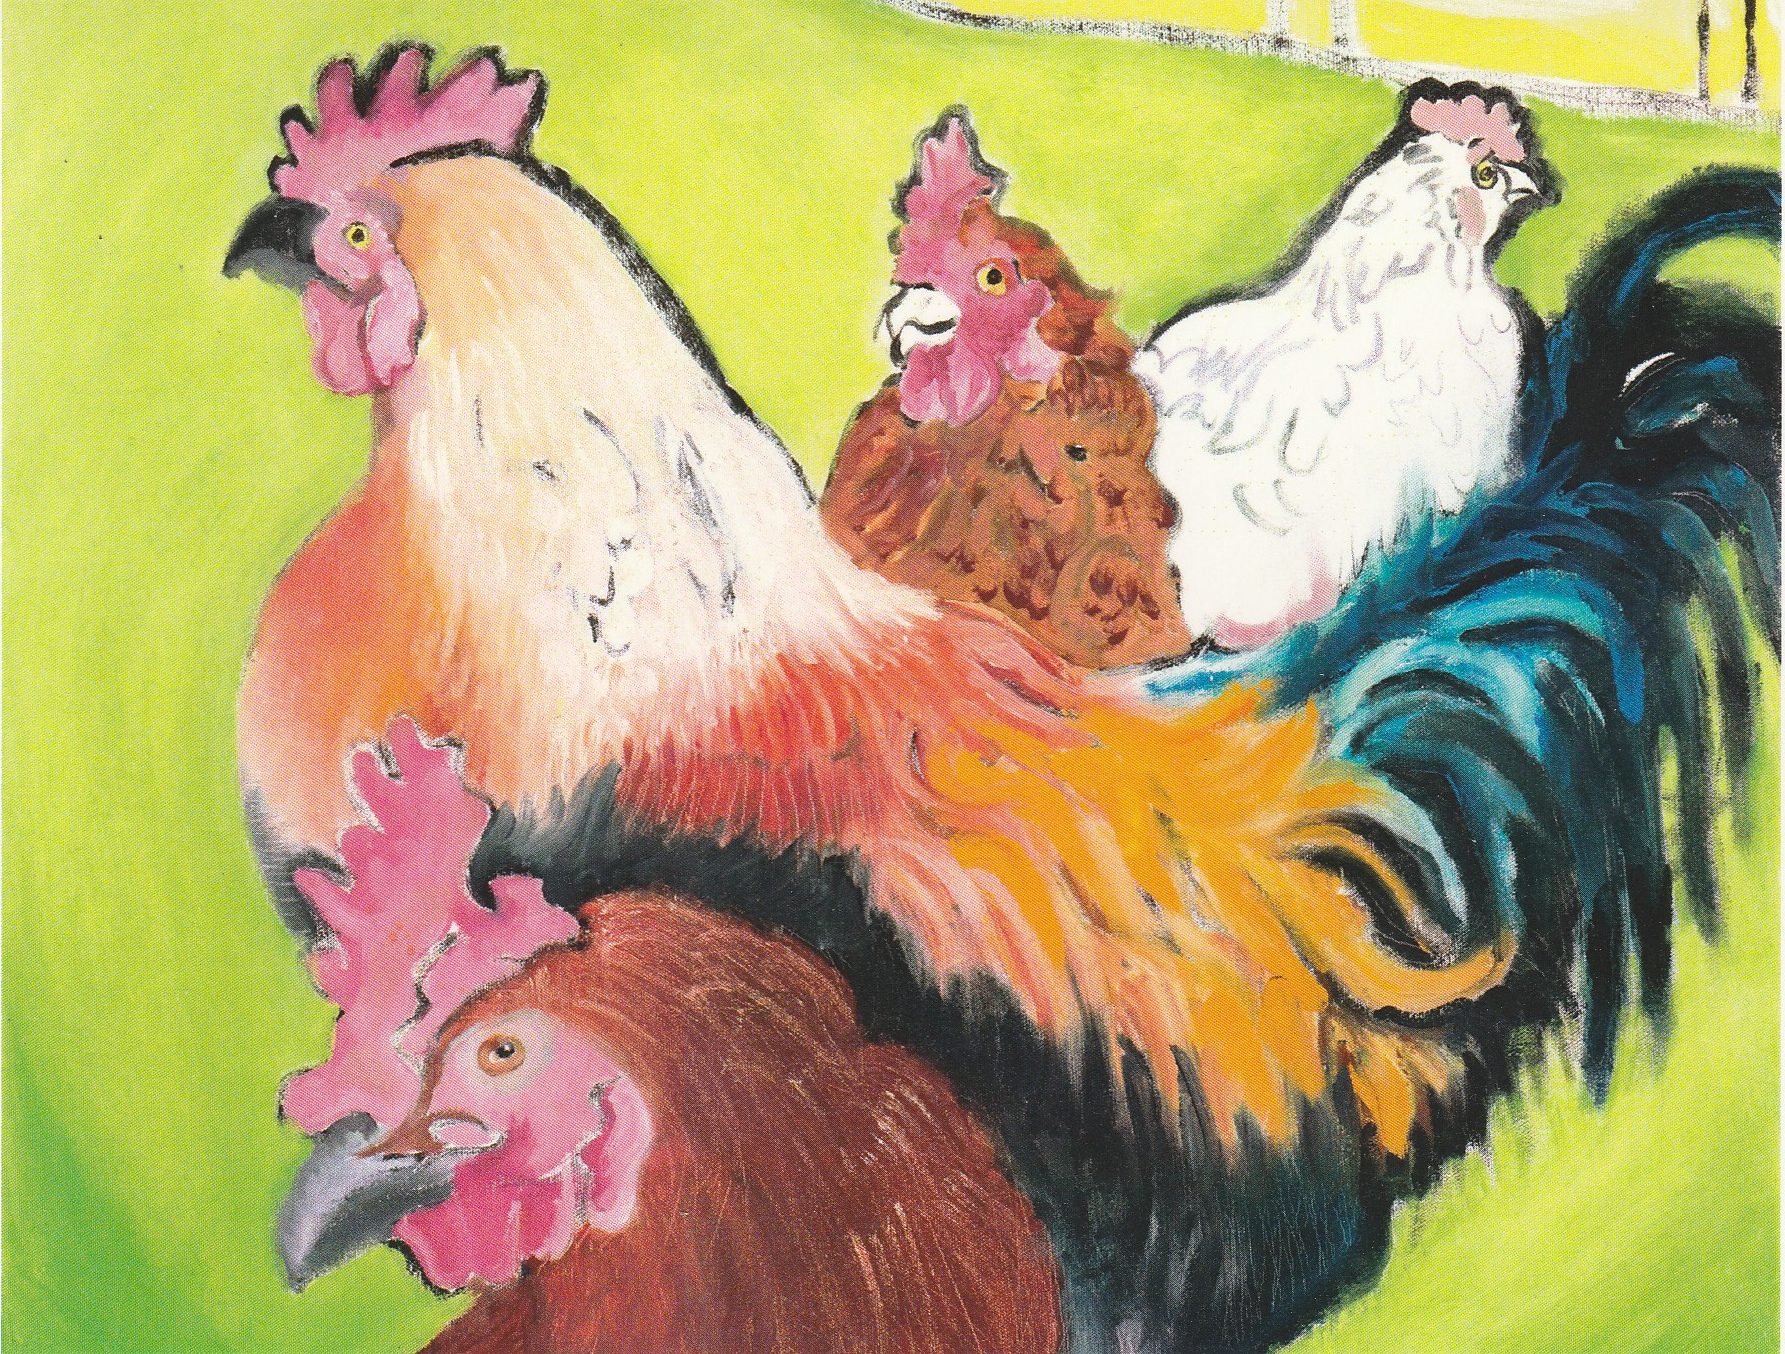 Four hens in a cluster